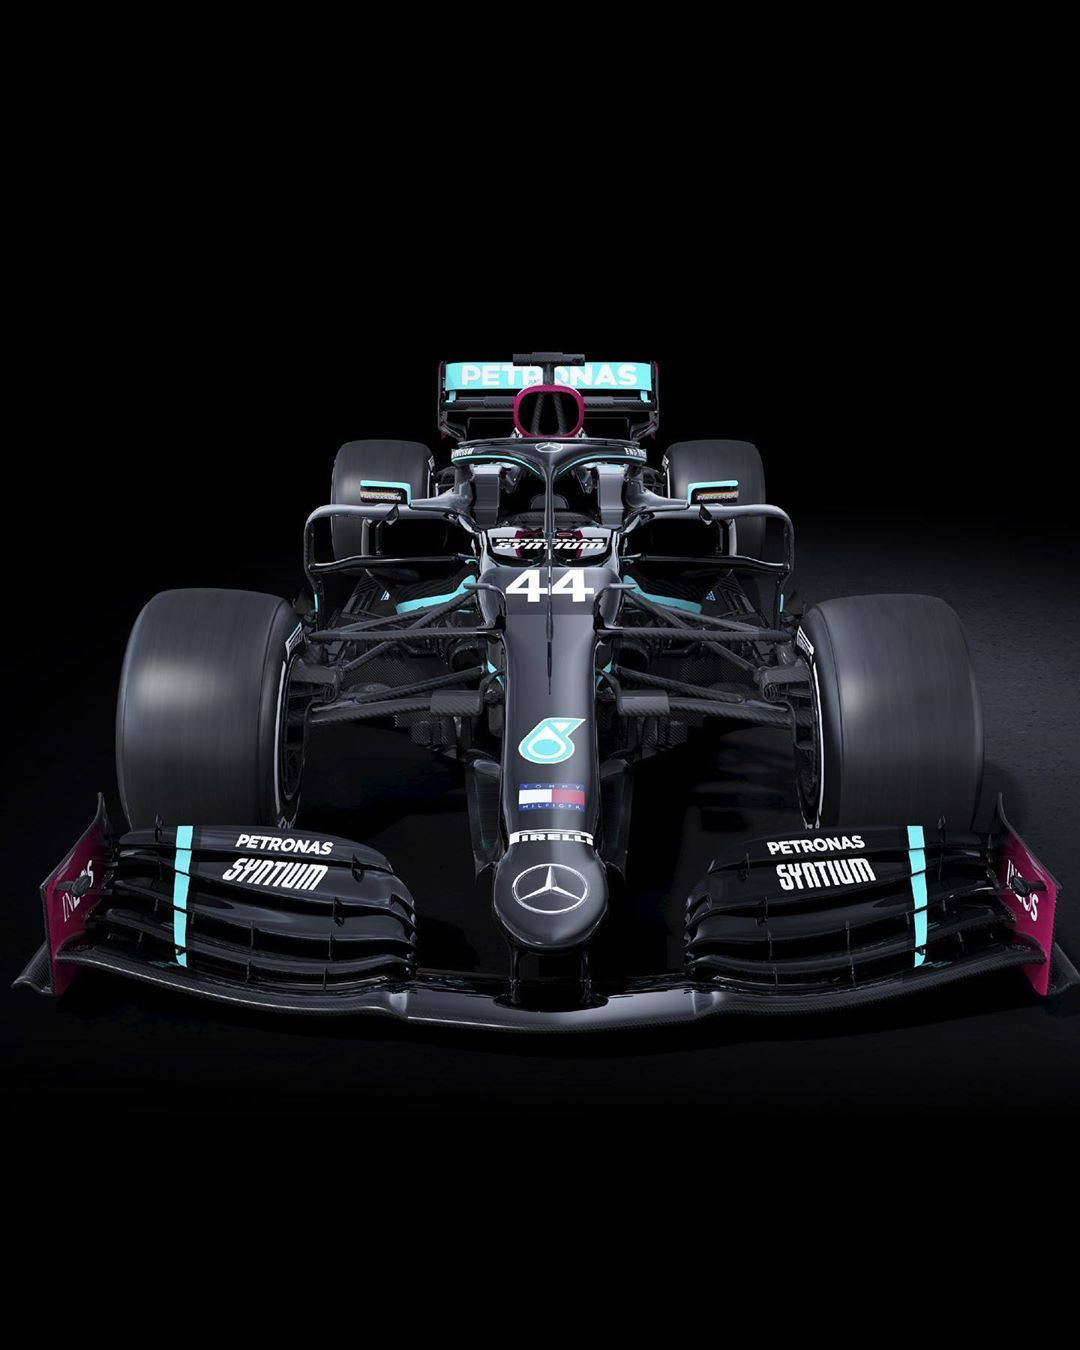 See the world from a new perspective with the Mercedes F1 Iphone Wallpaper